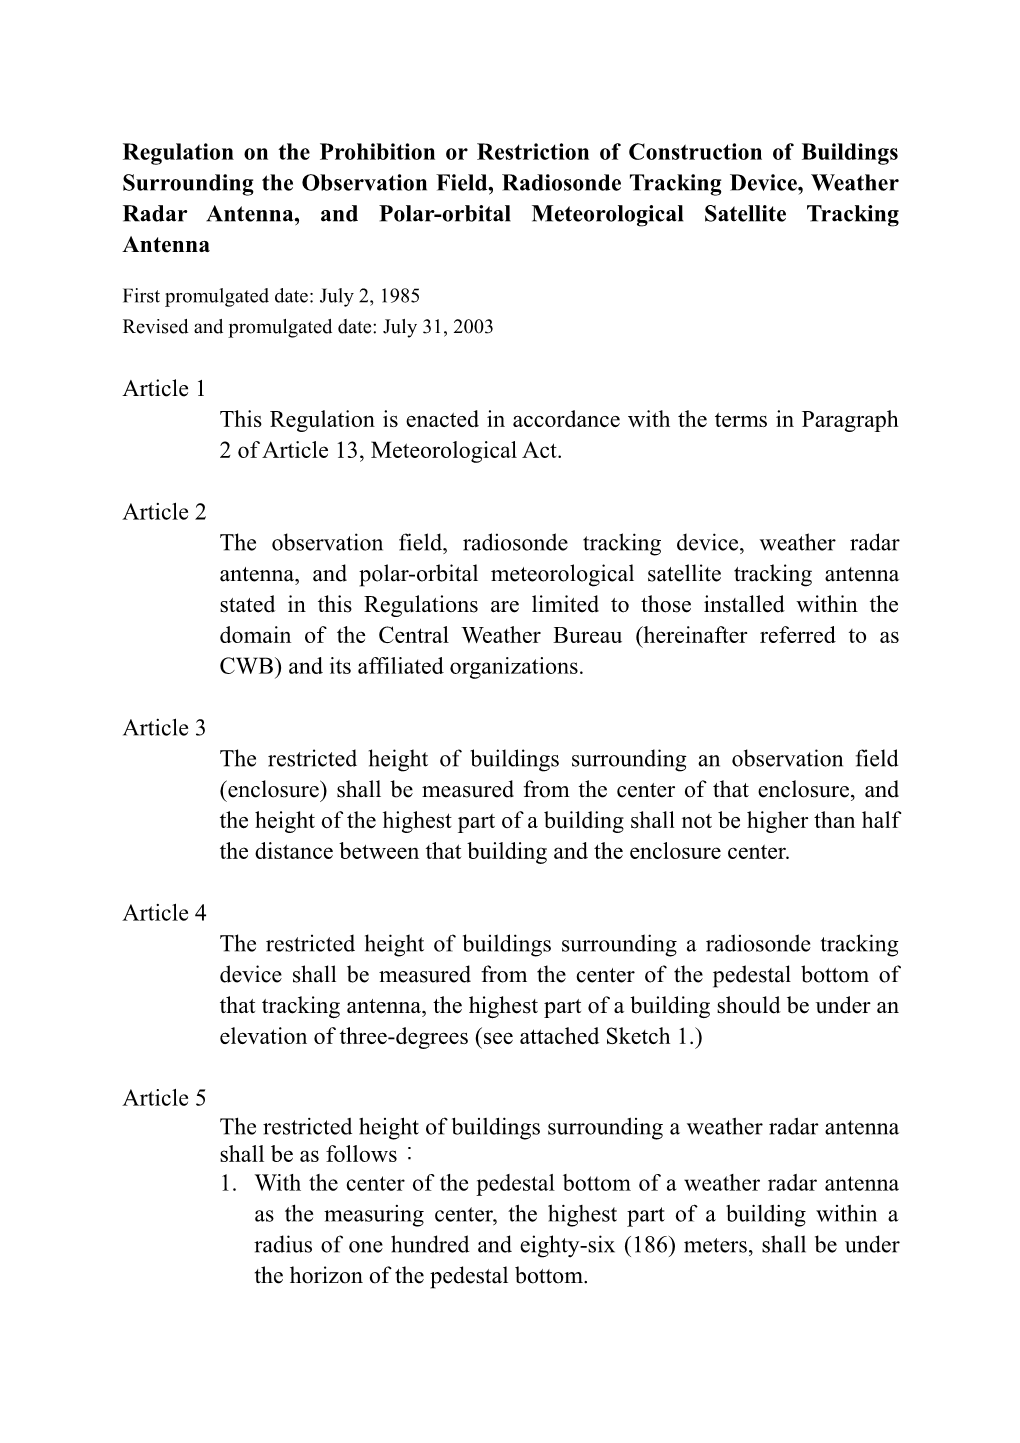 Regulation on the Prohibition Or Restriction of Construction of Buildings Surrounding The